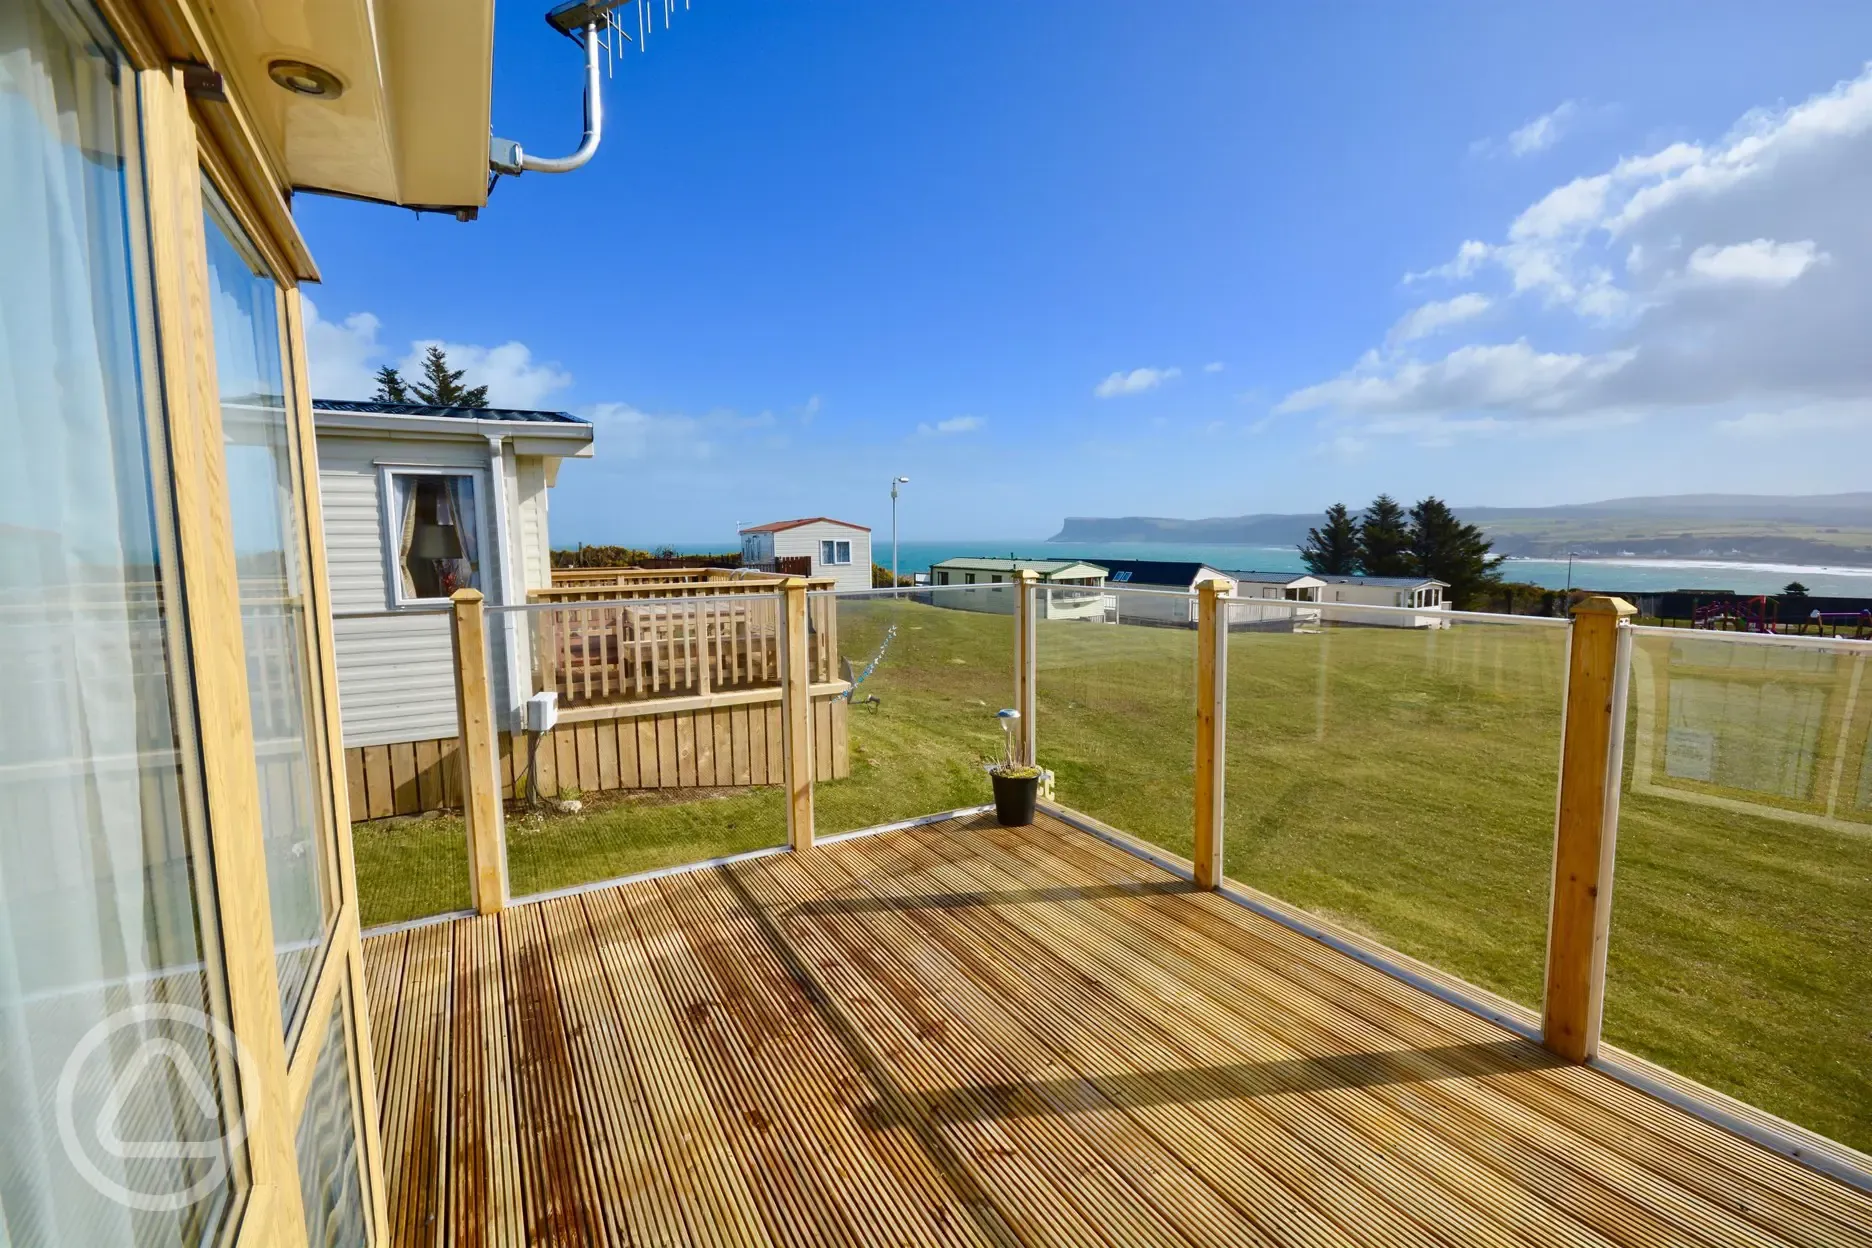 Enjoy stunning views from the decking of your holiday home